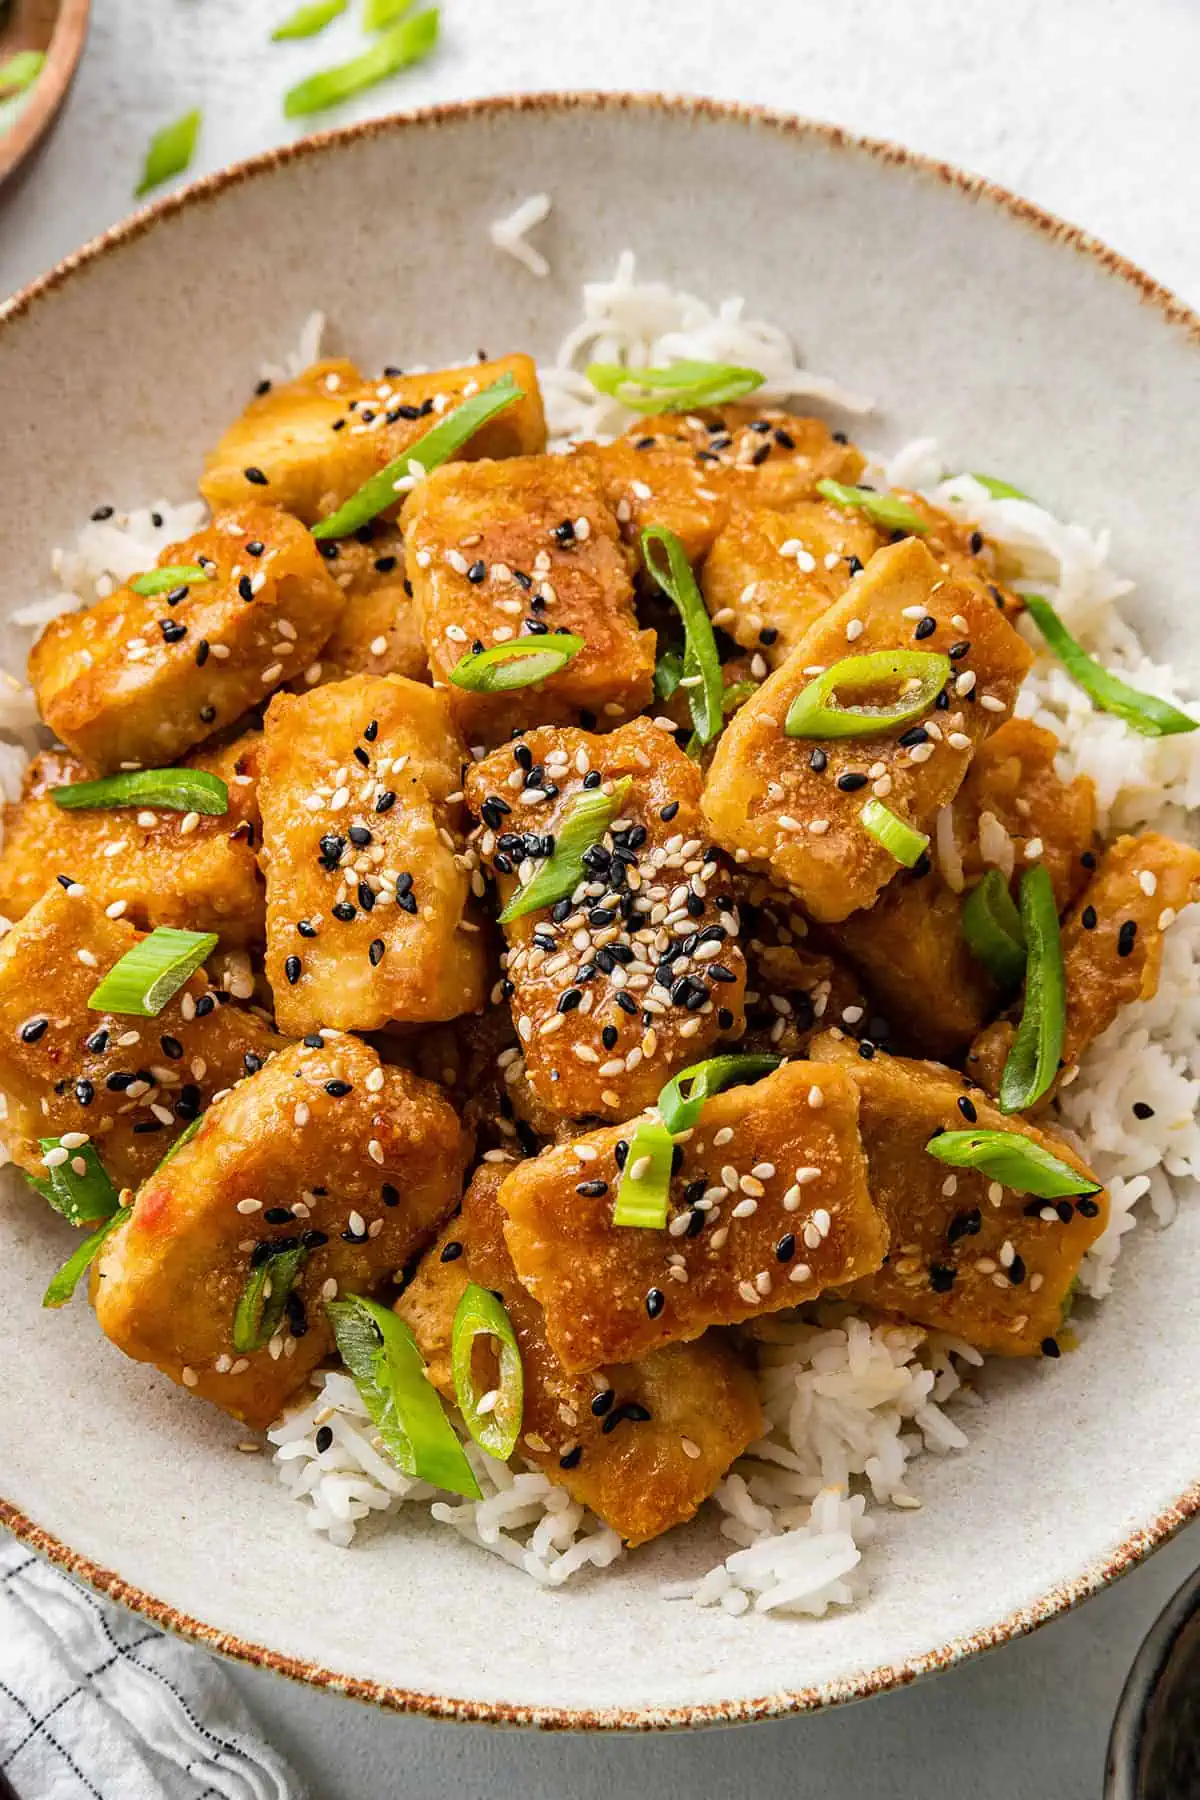 A pile of baked tofu on top of rice, topped with scallions and sesame seeds